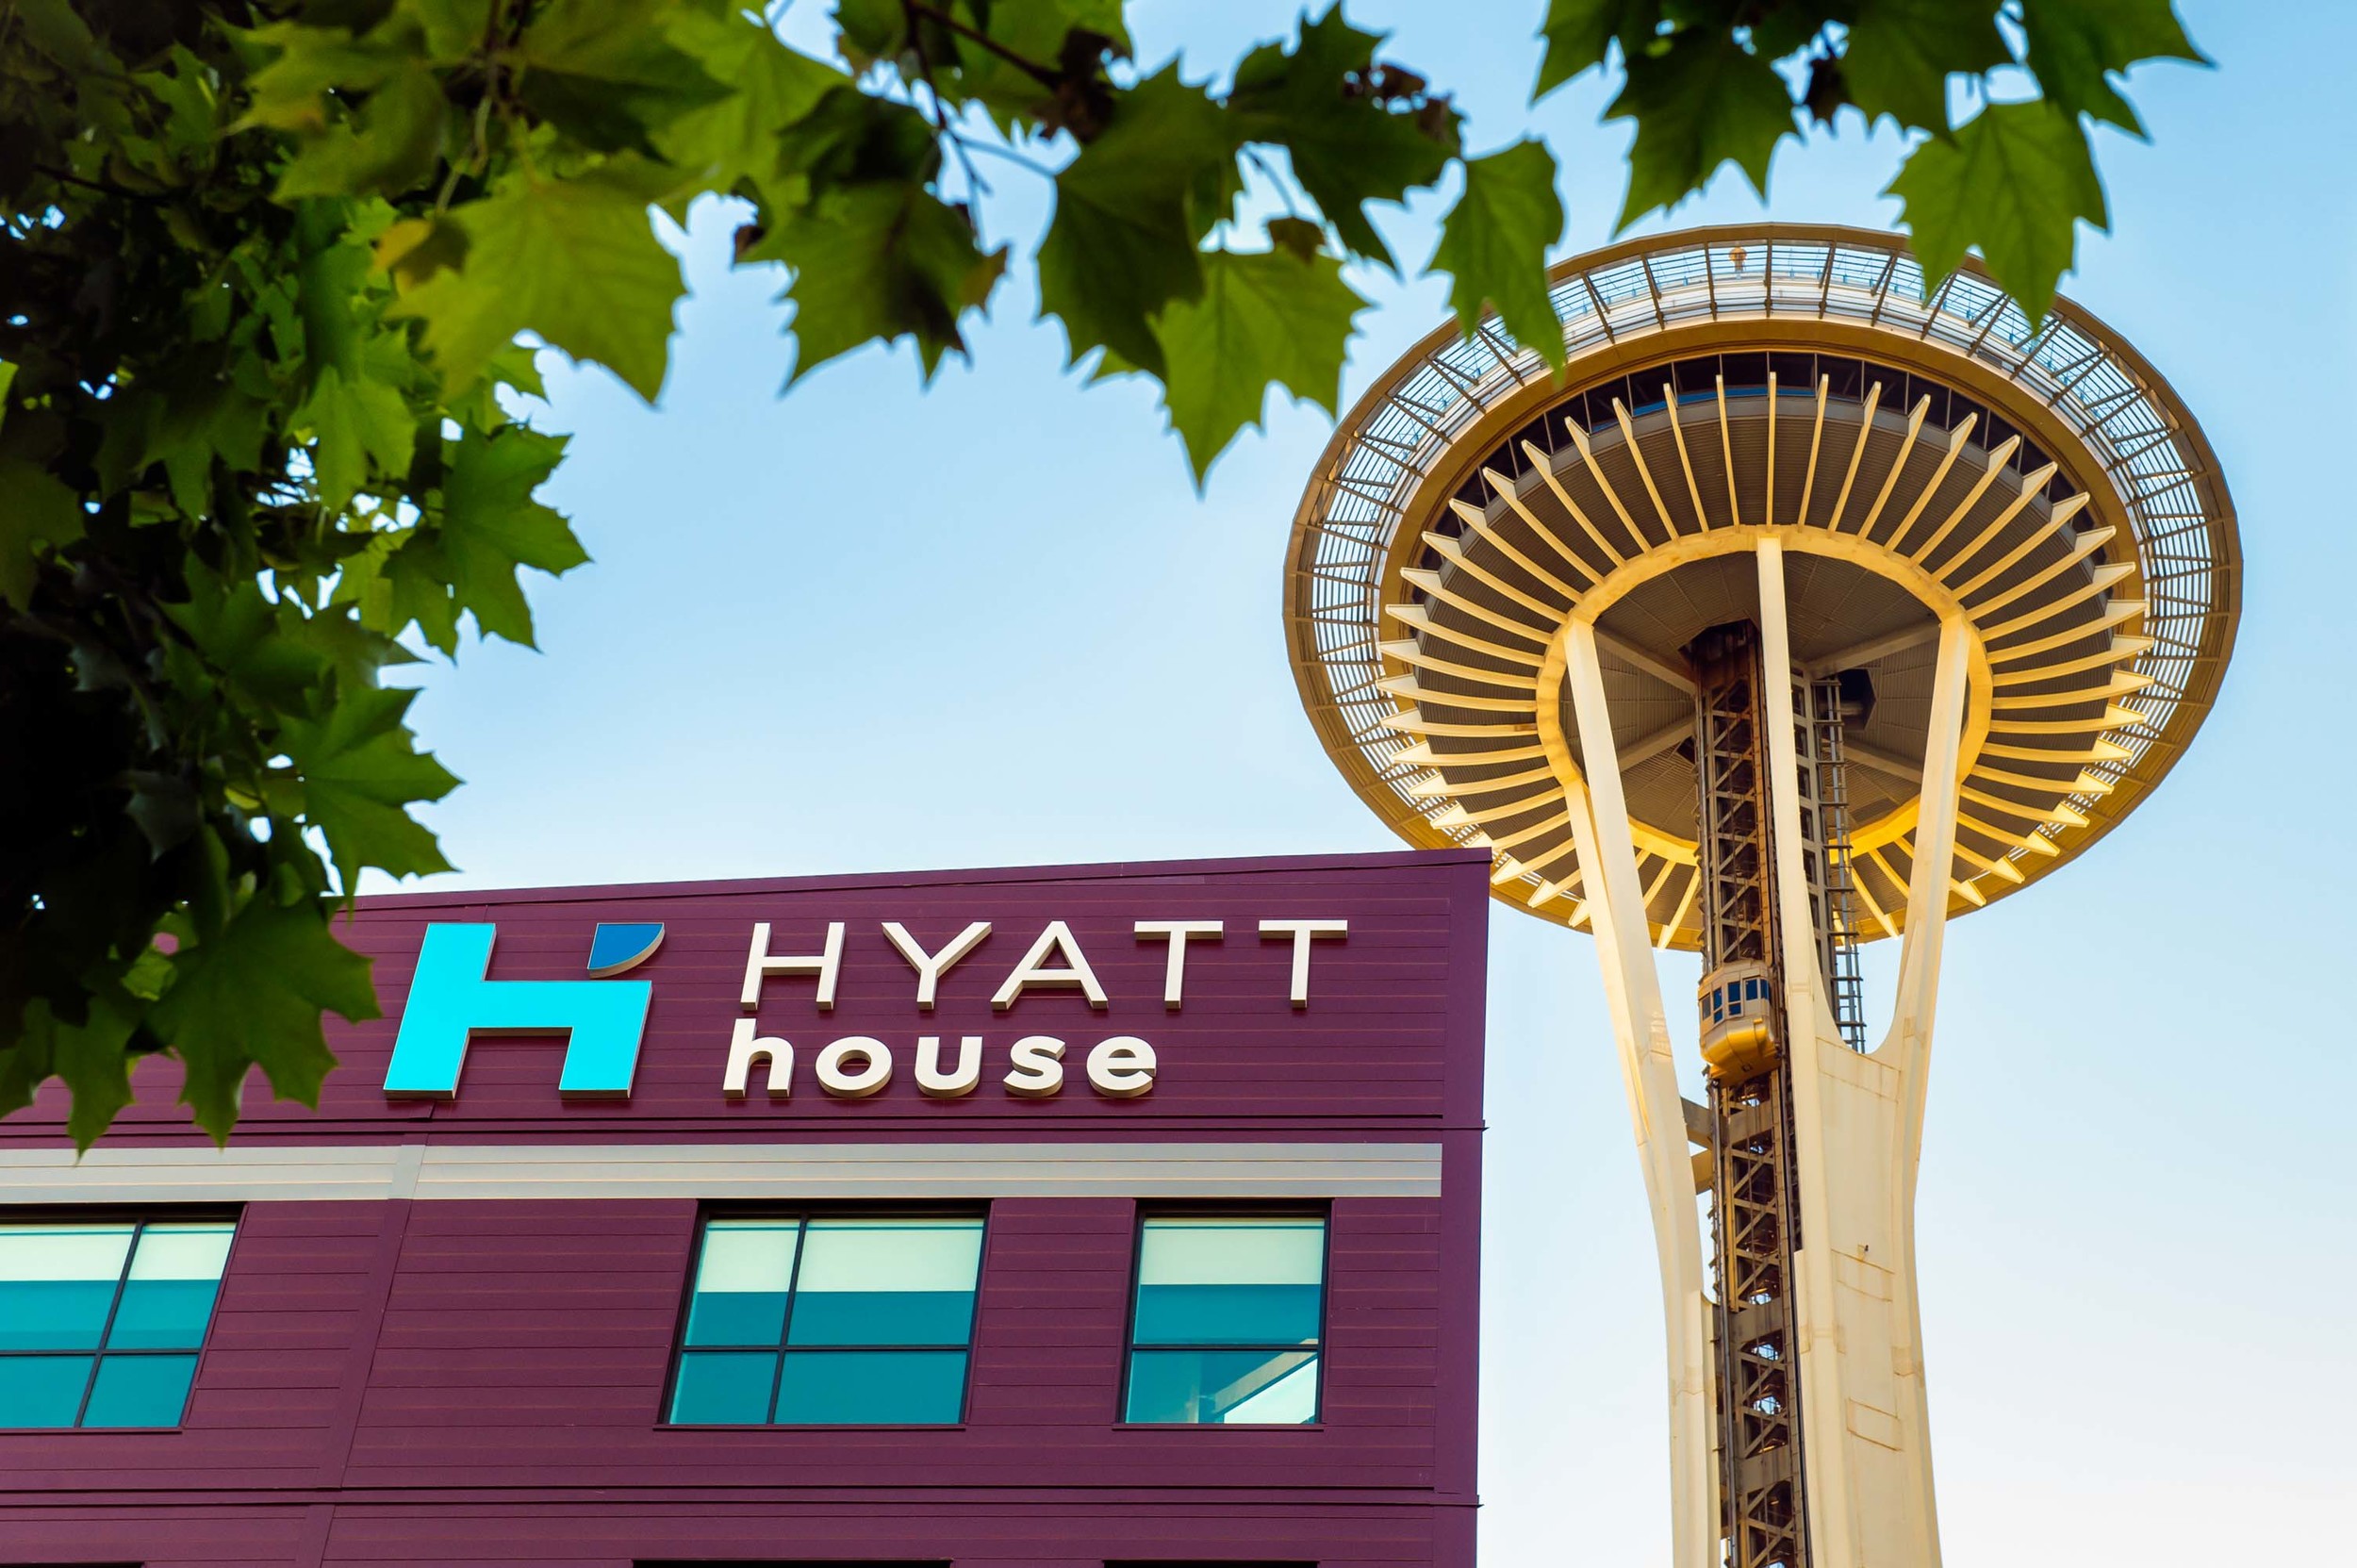 View of Hyatt House with Space Needle